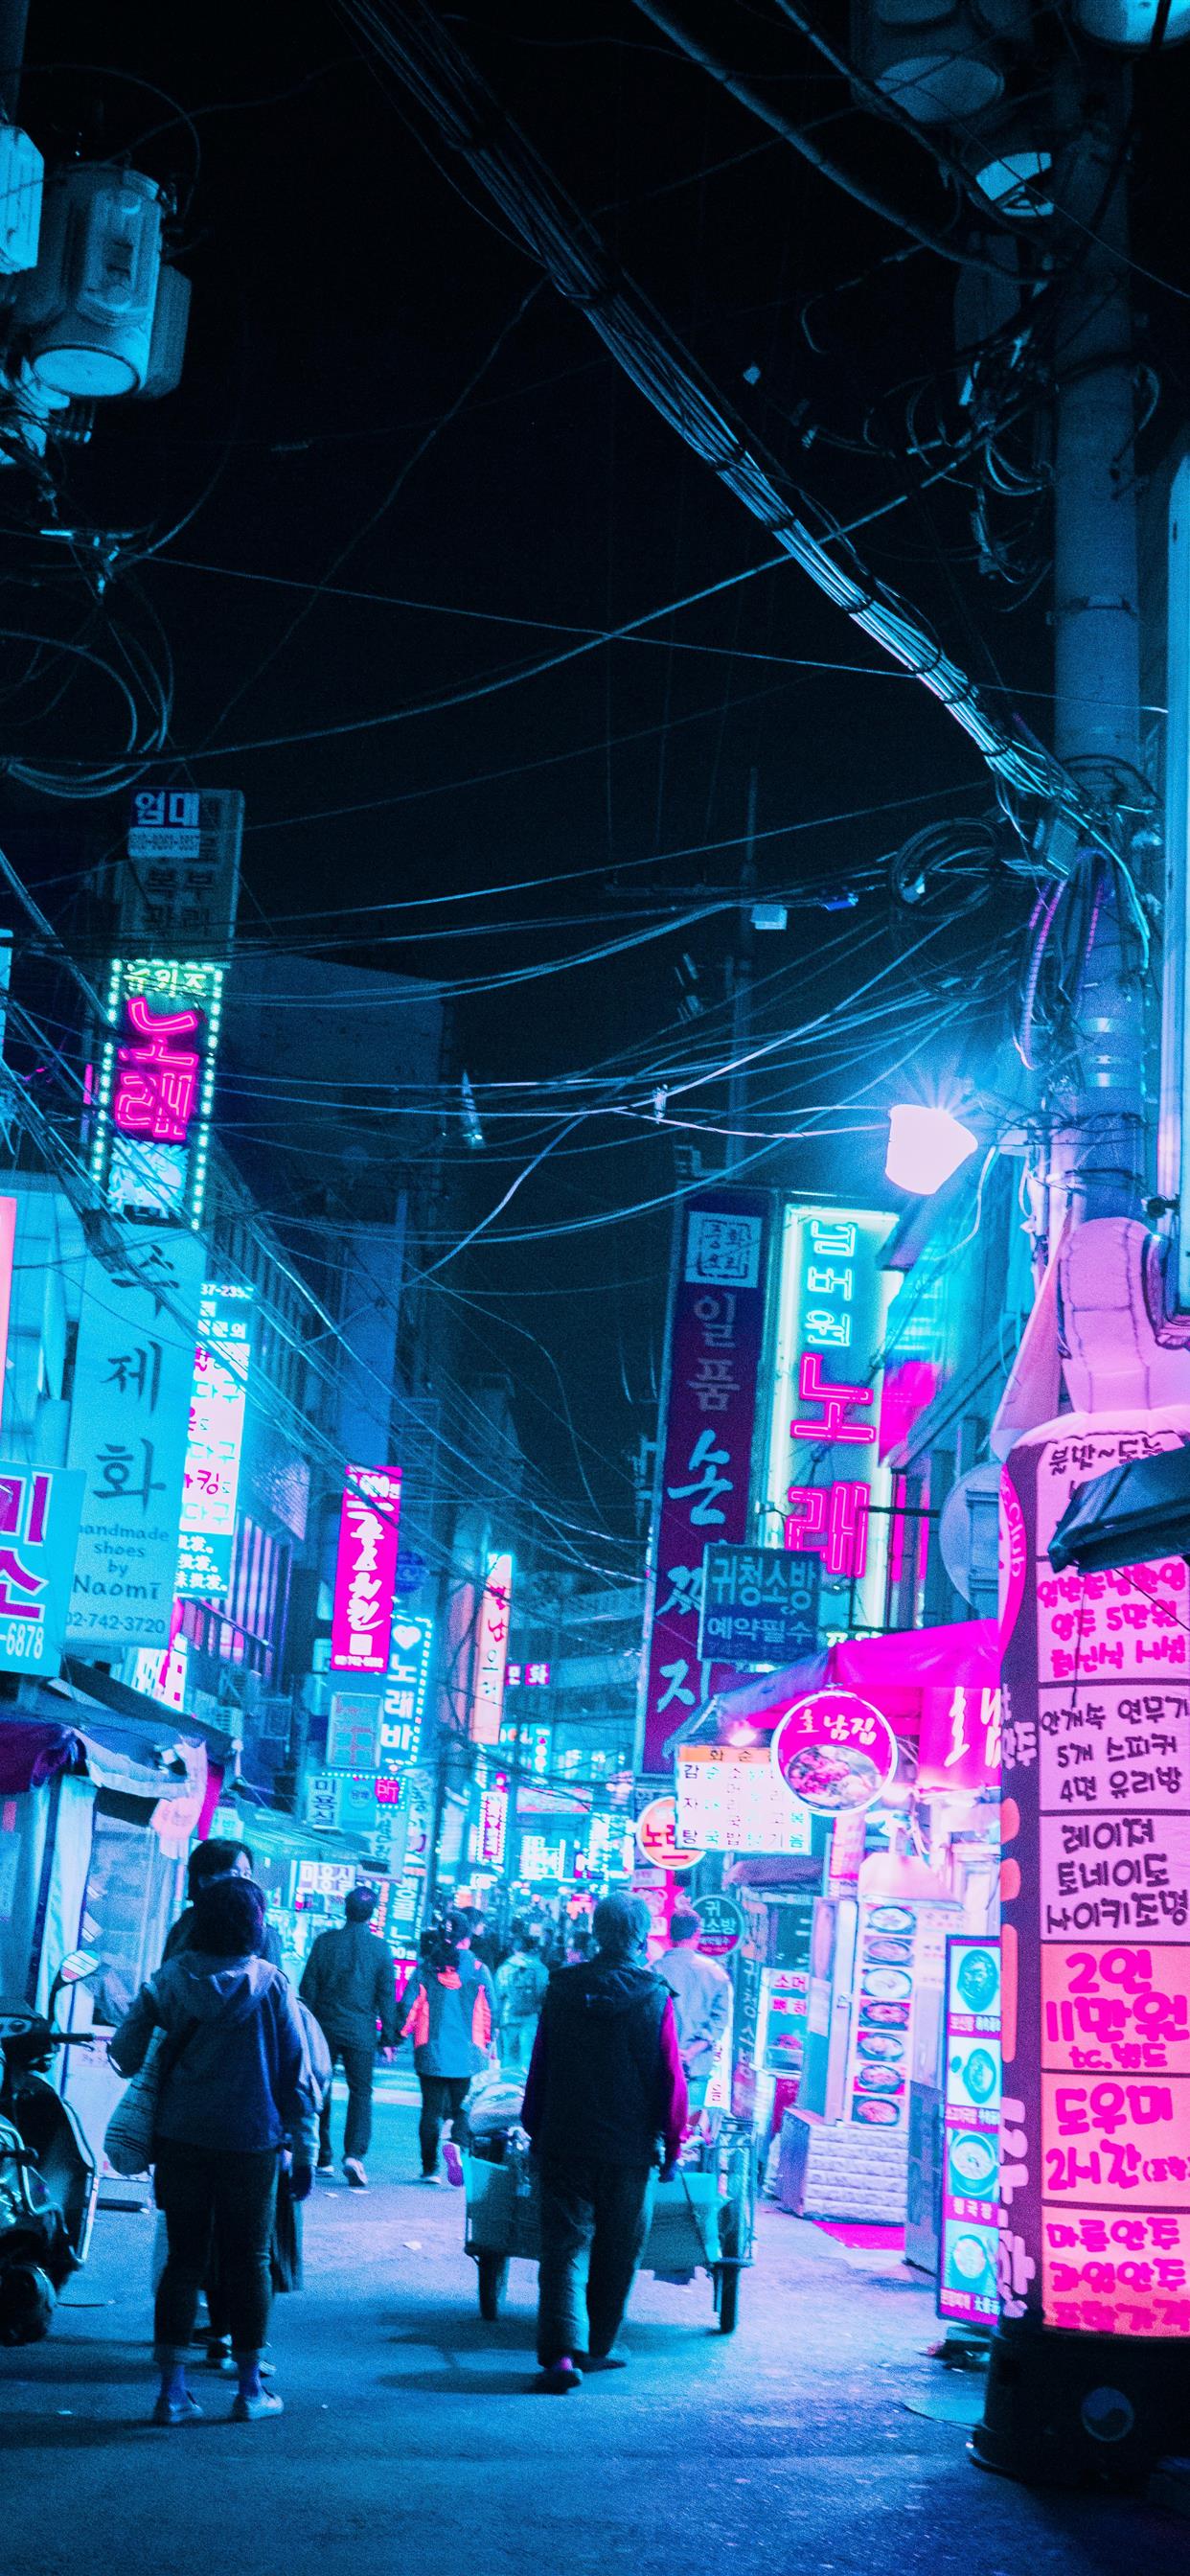 Seoul iPhone Wallpapers on WallpaperDog